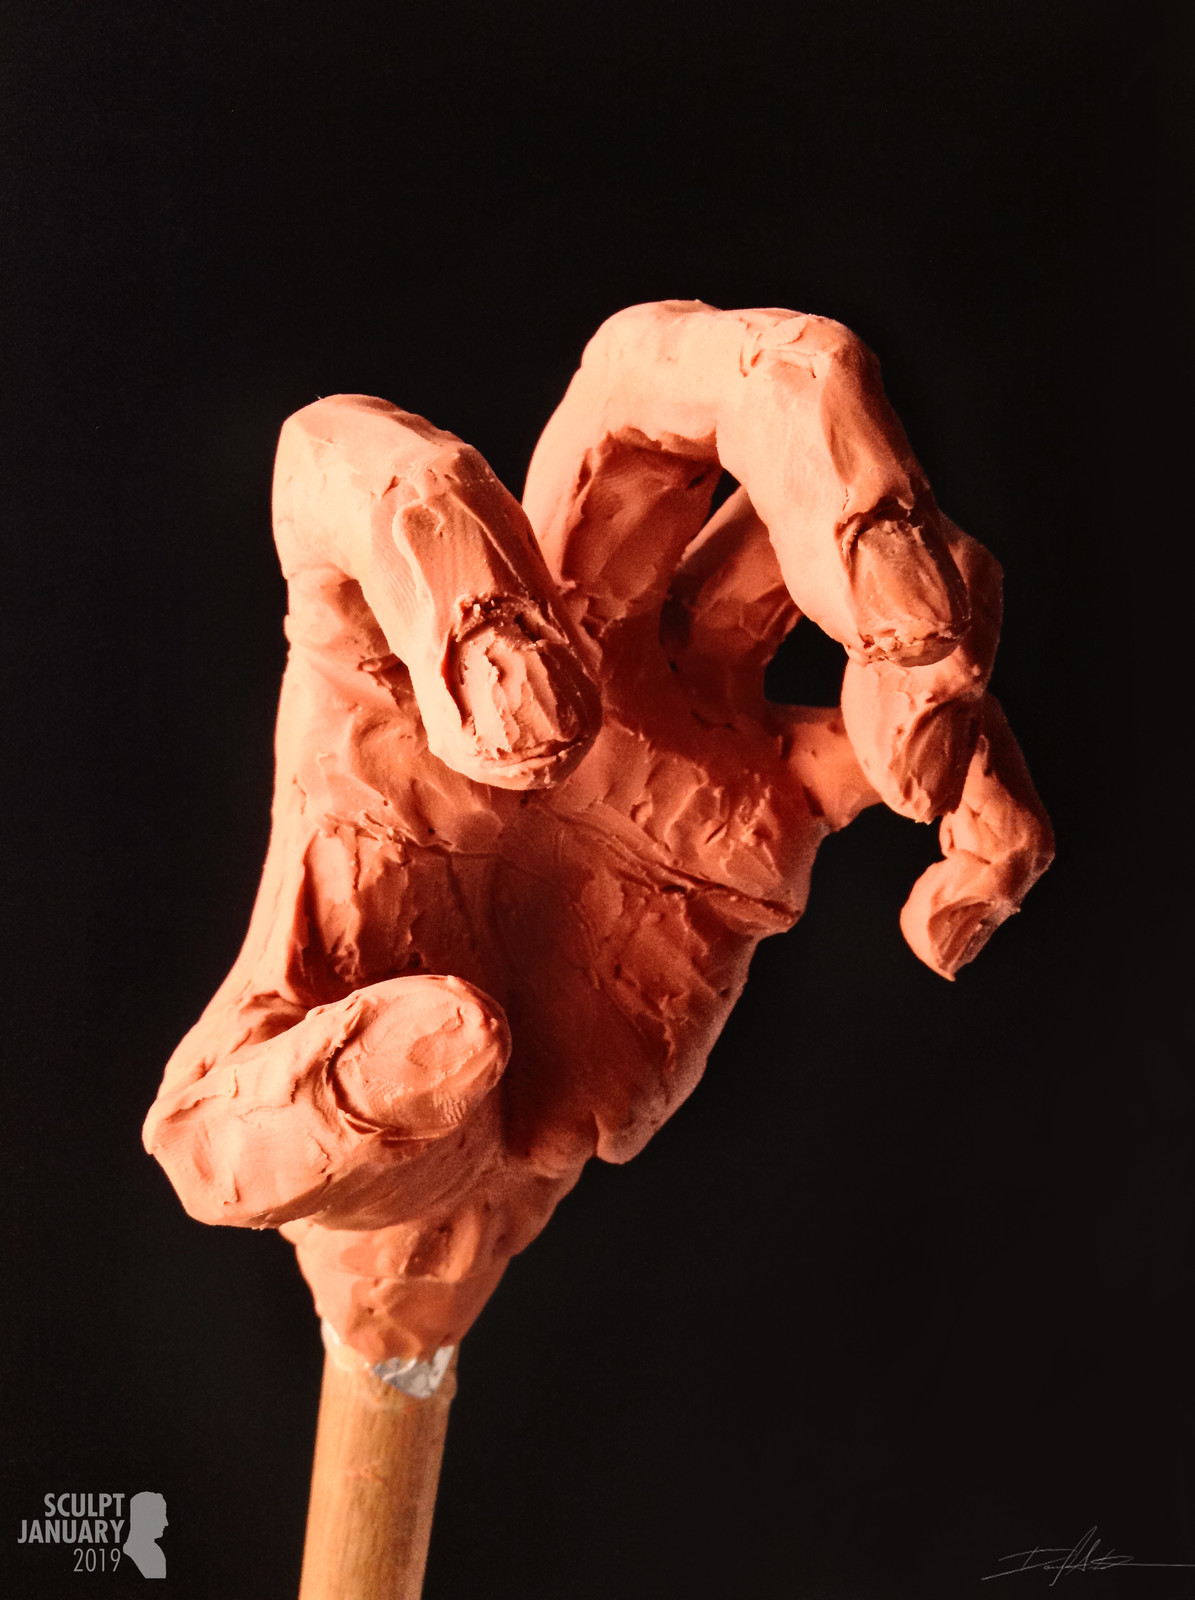 SCULPT JANUARY Day 17 - Hand Pose